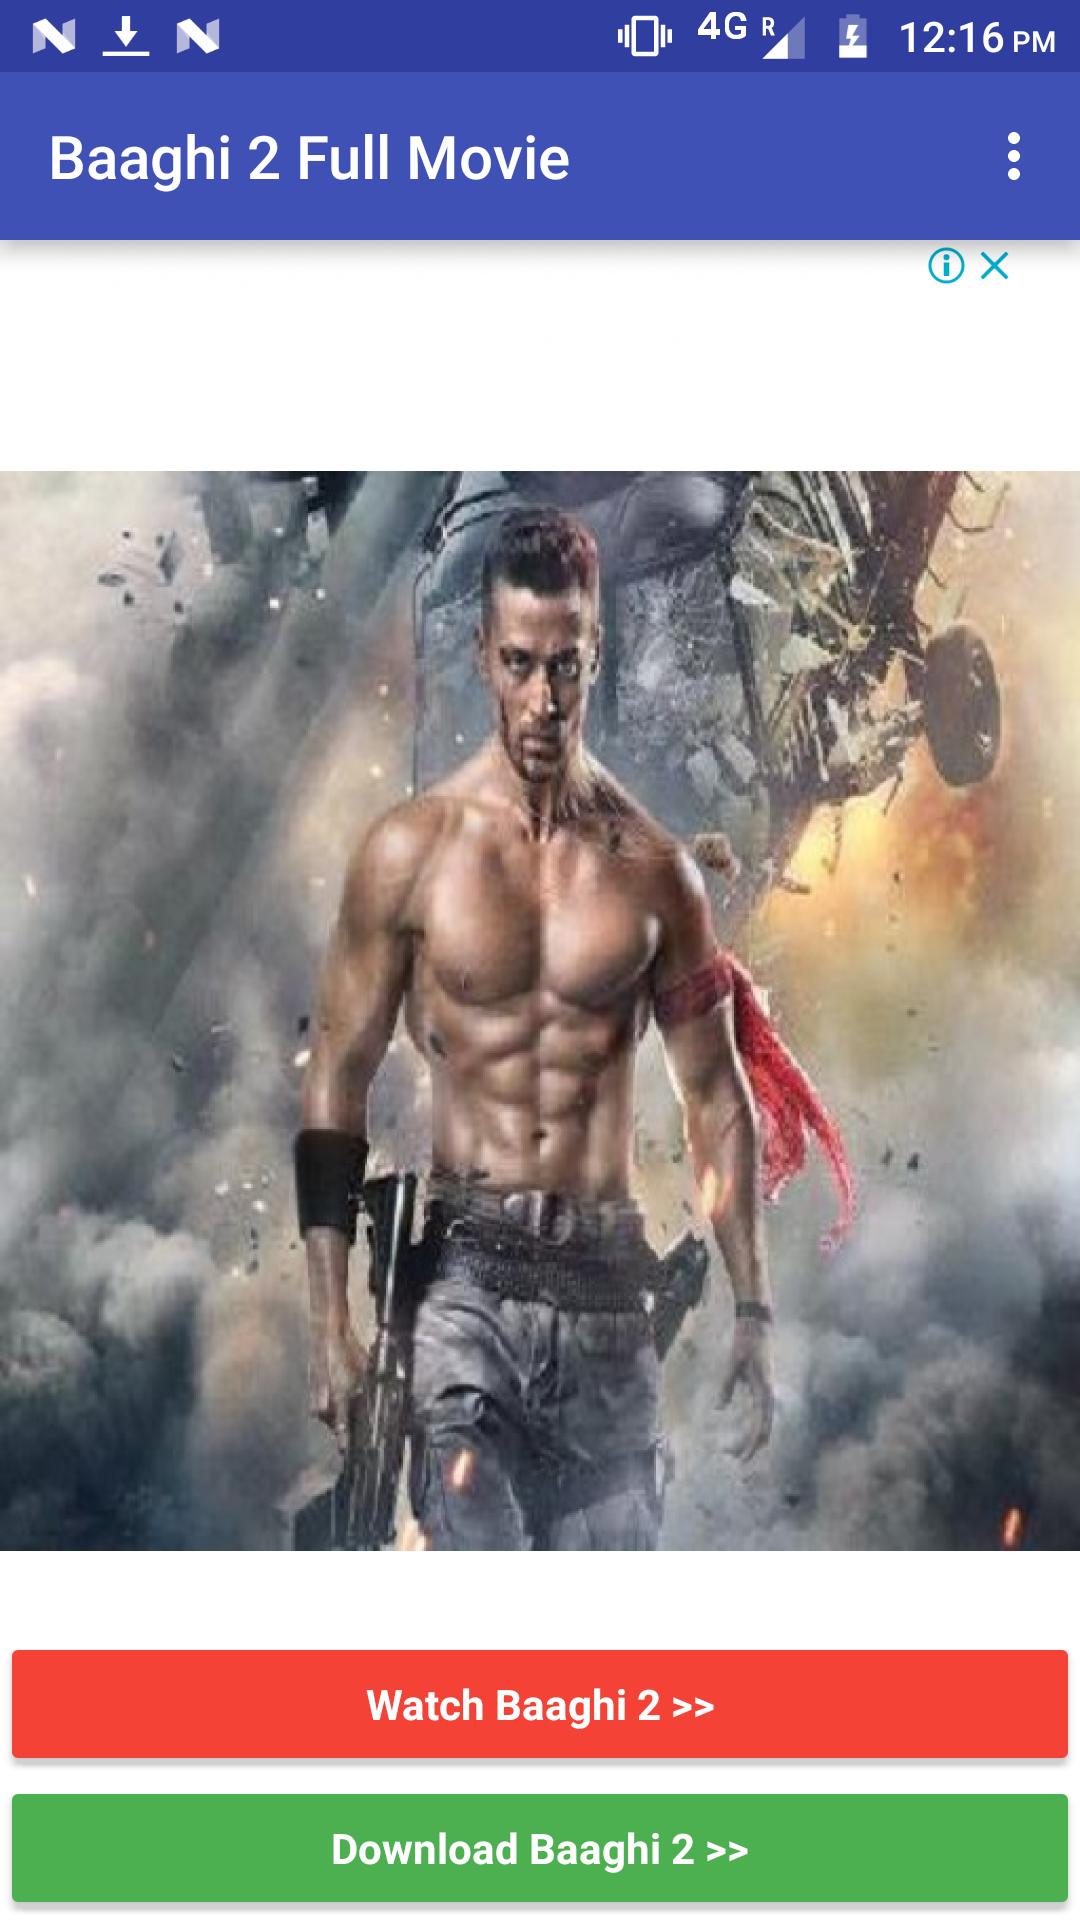 Baaghi 2 movie 2018 download hd 720p